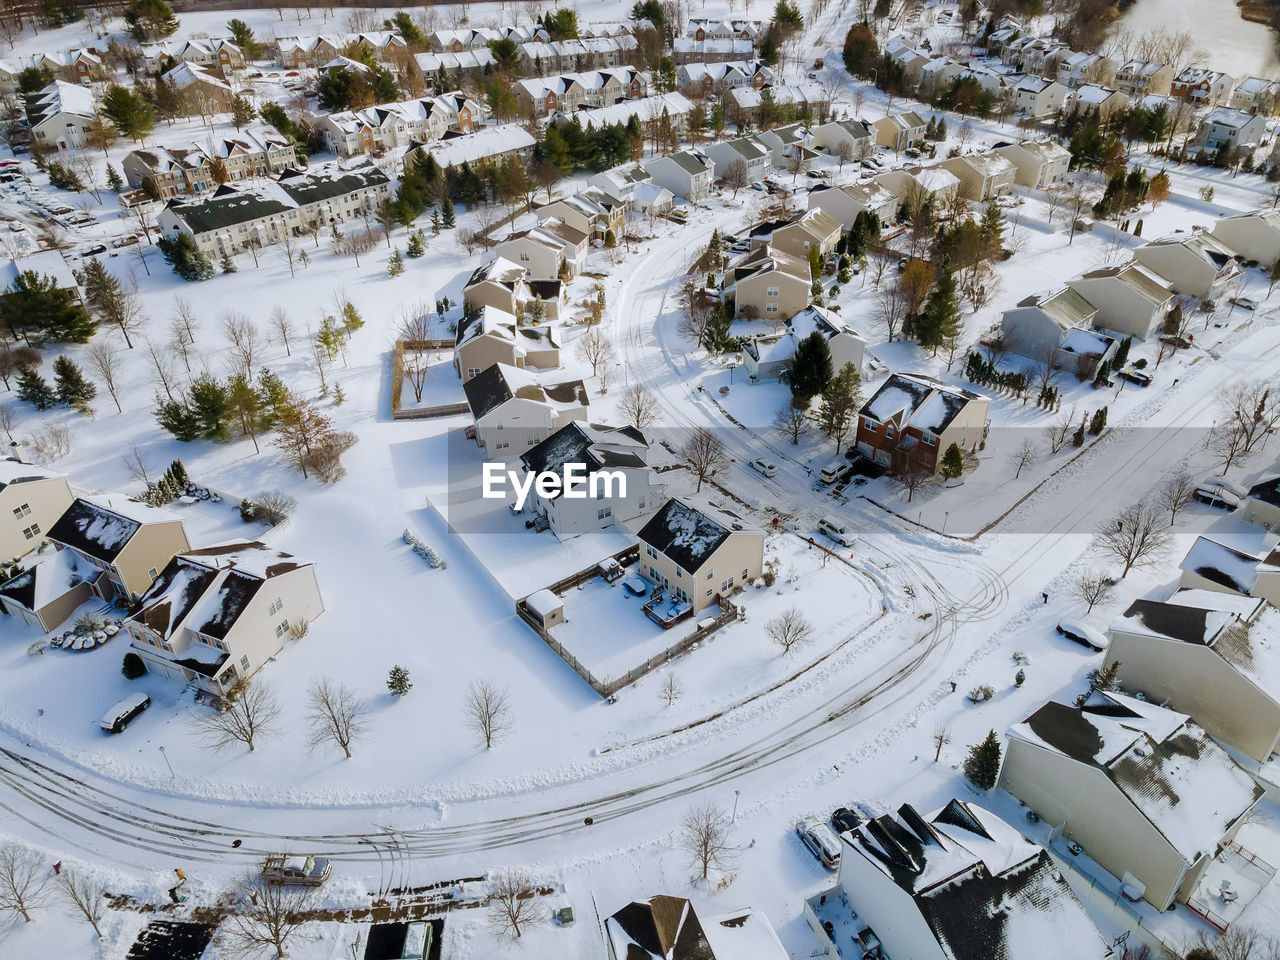 HIGH ANGLE VIEW OF SNOW COVERED HOUSES AND BUILDINGS